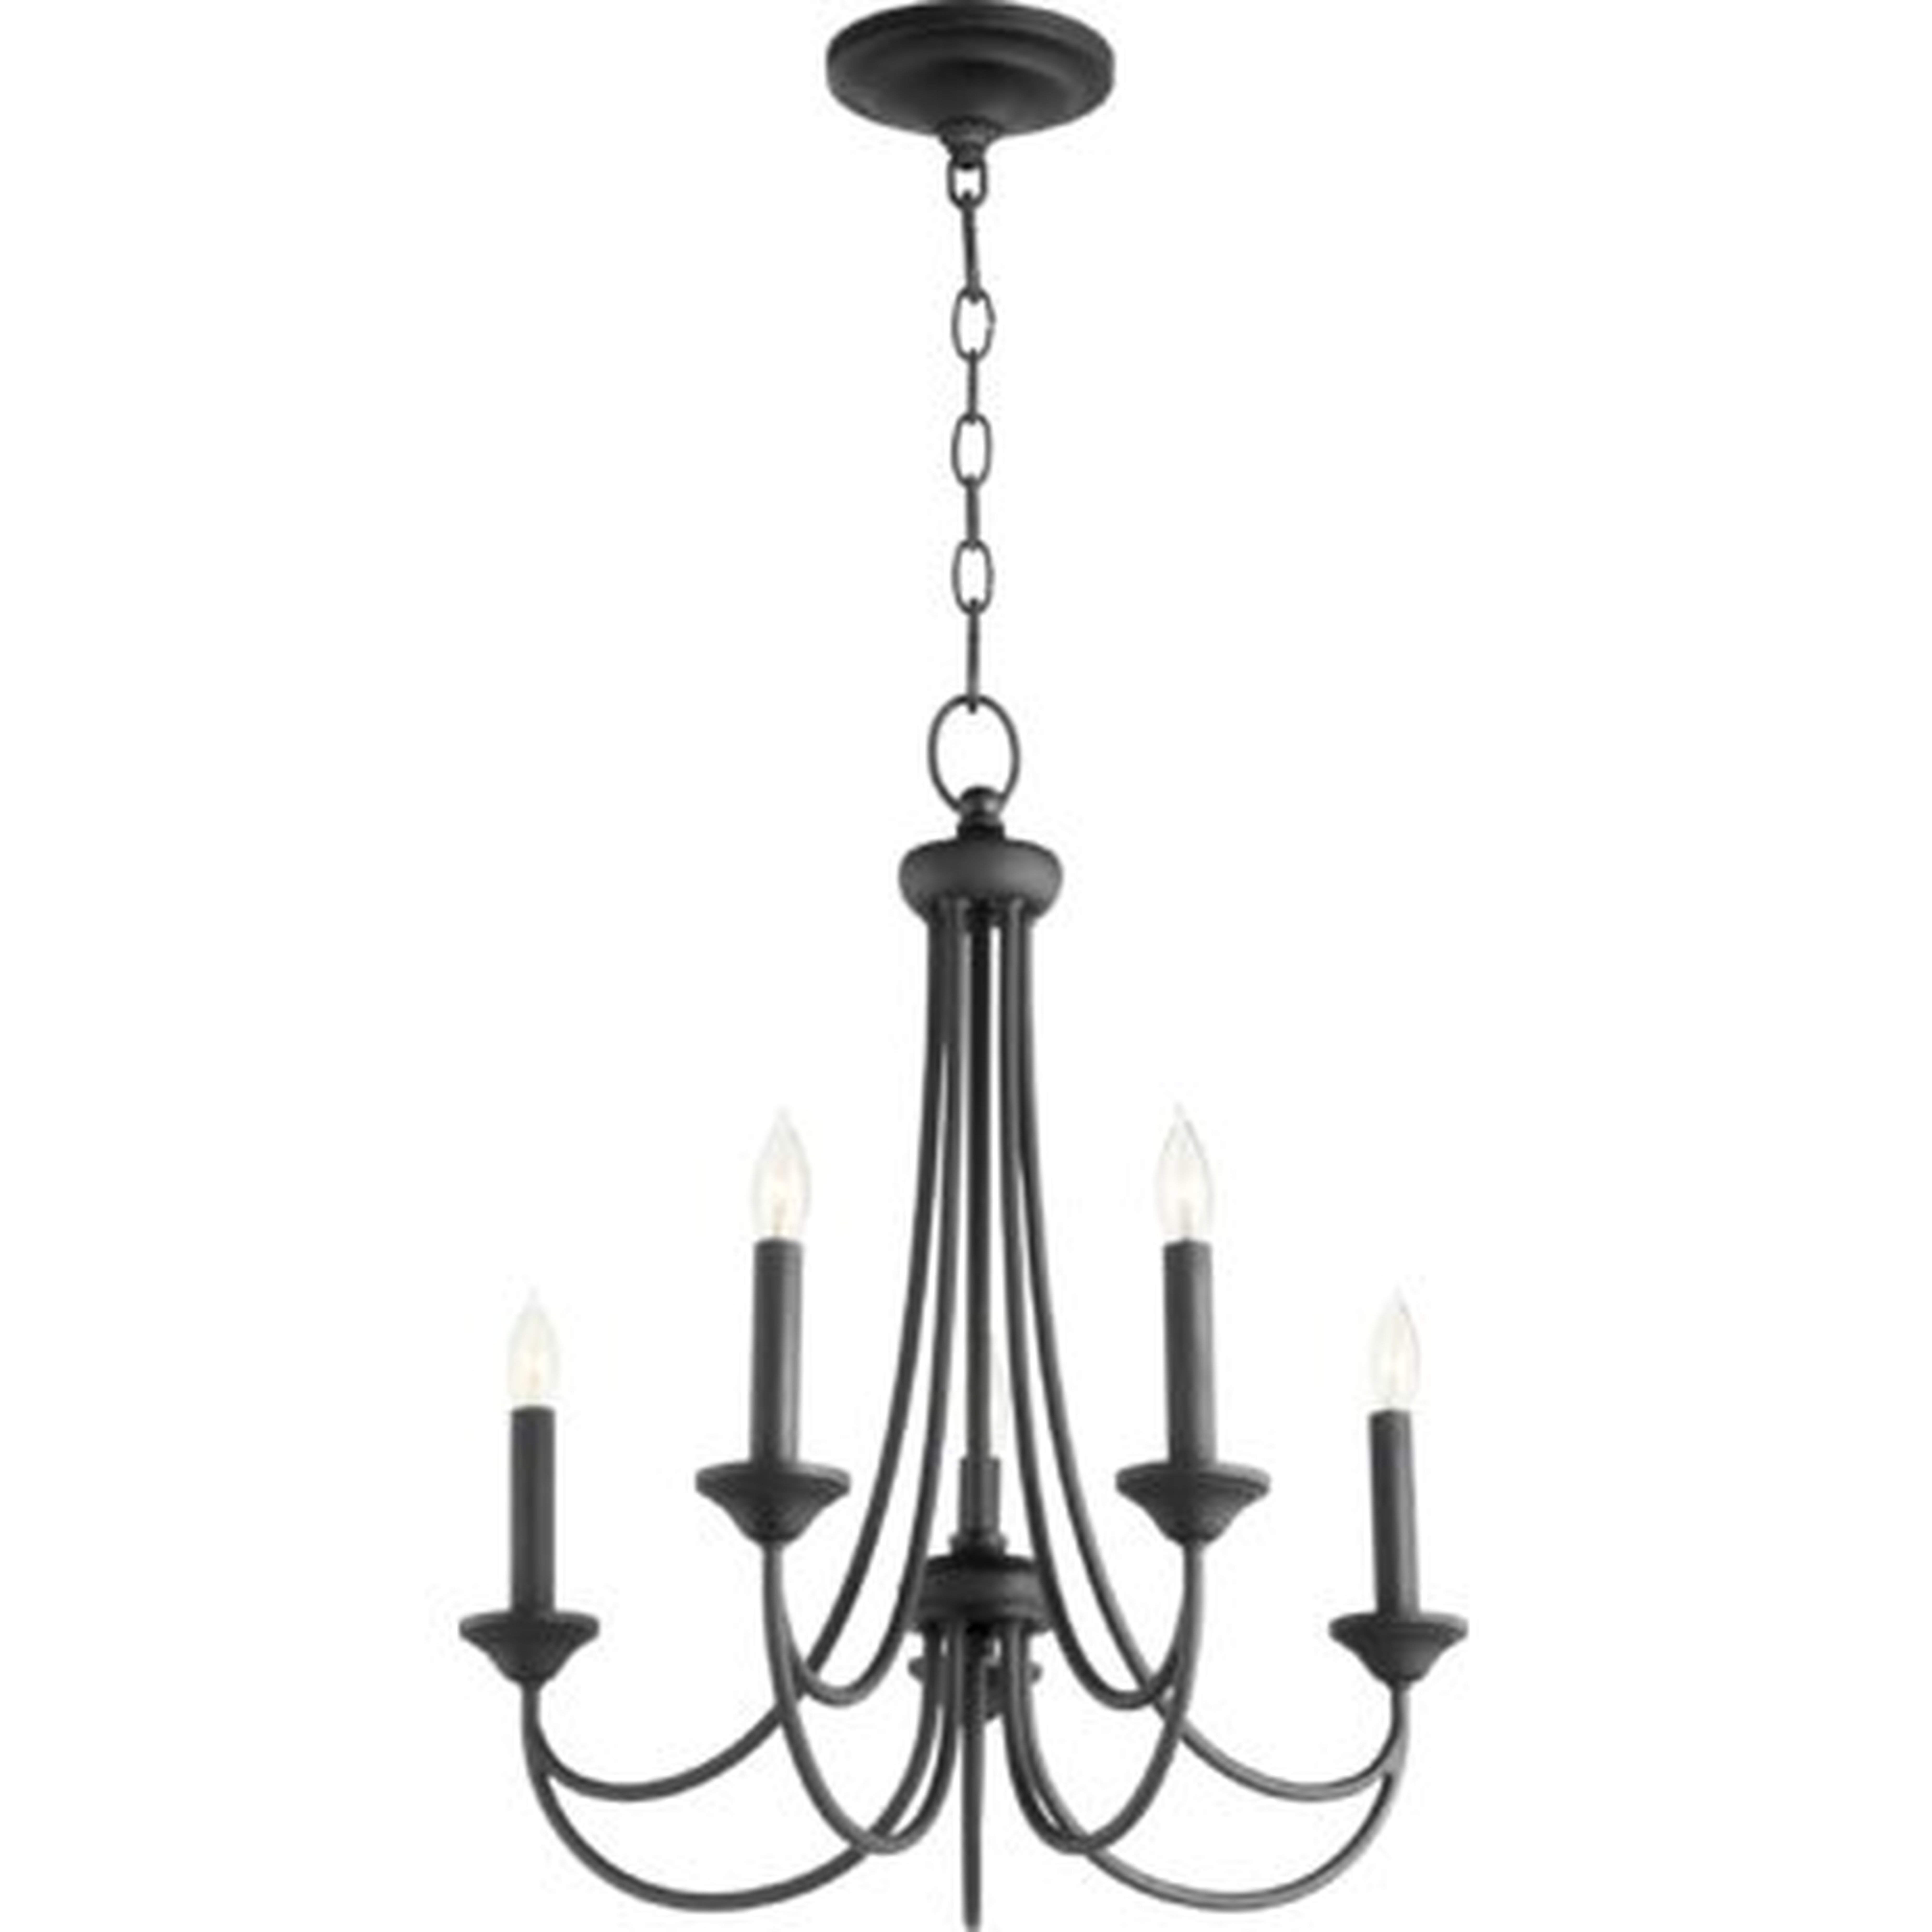 Polito 5-Light Candle Style Chandelier - Wayfair